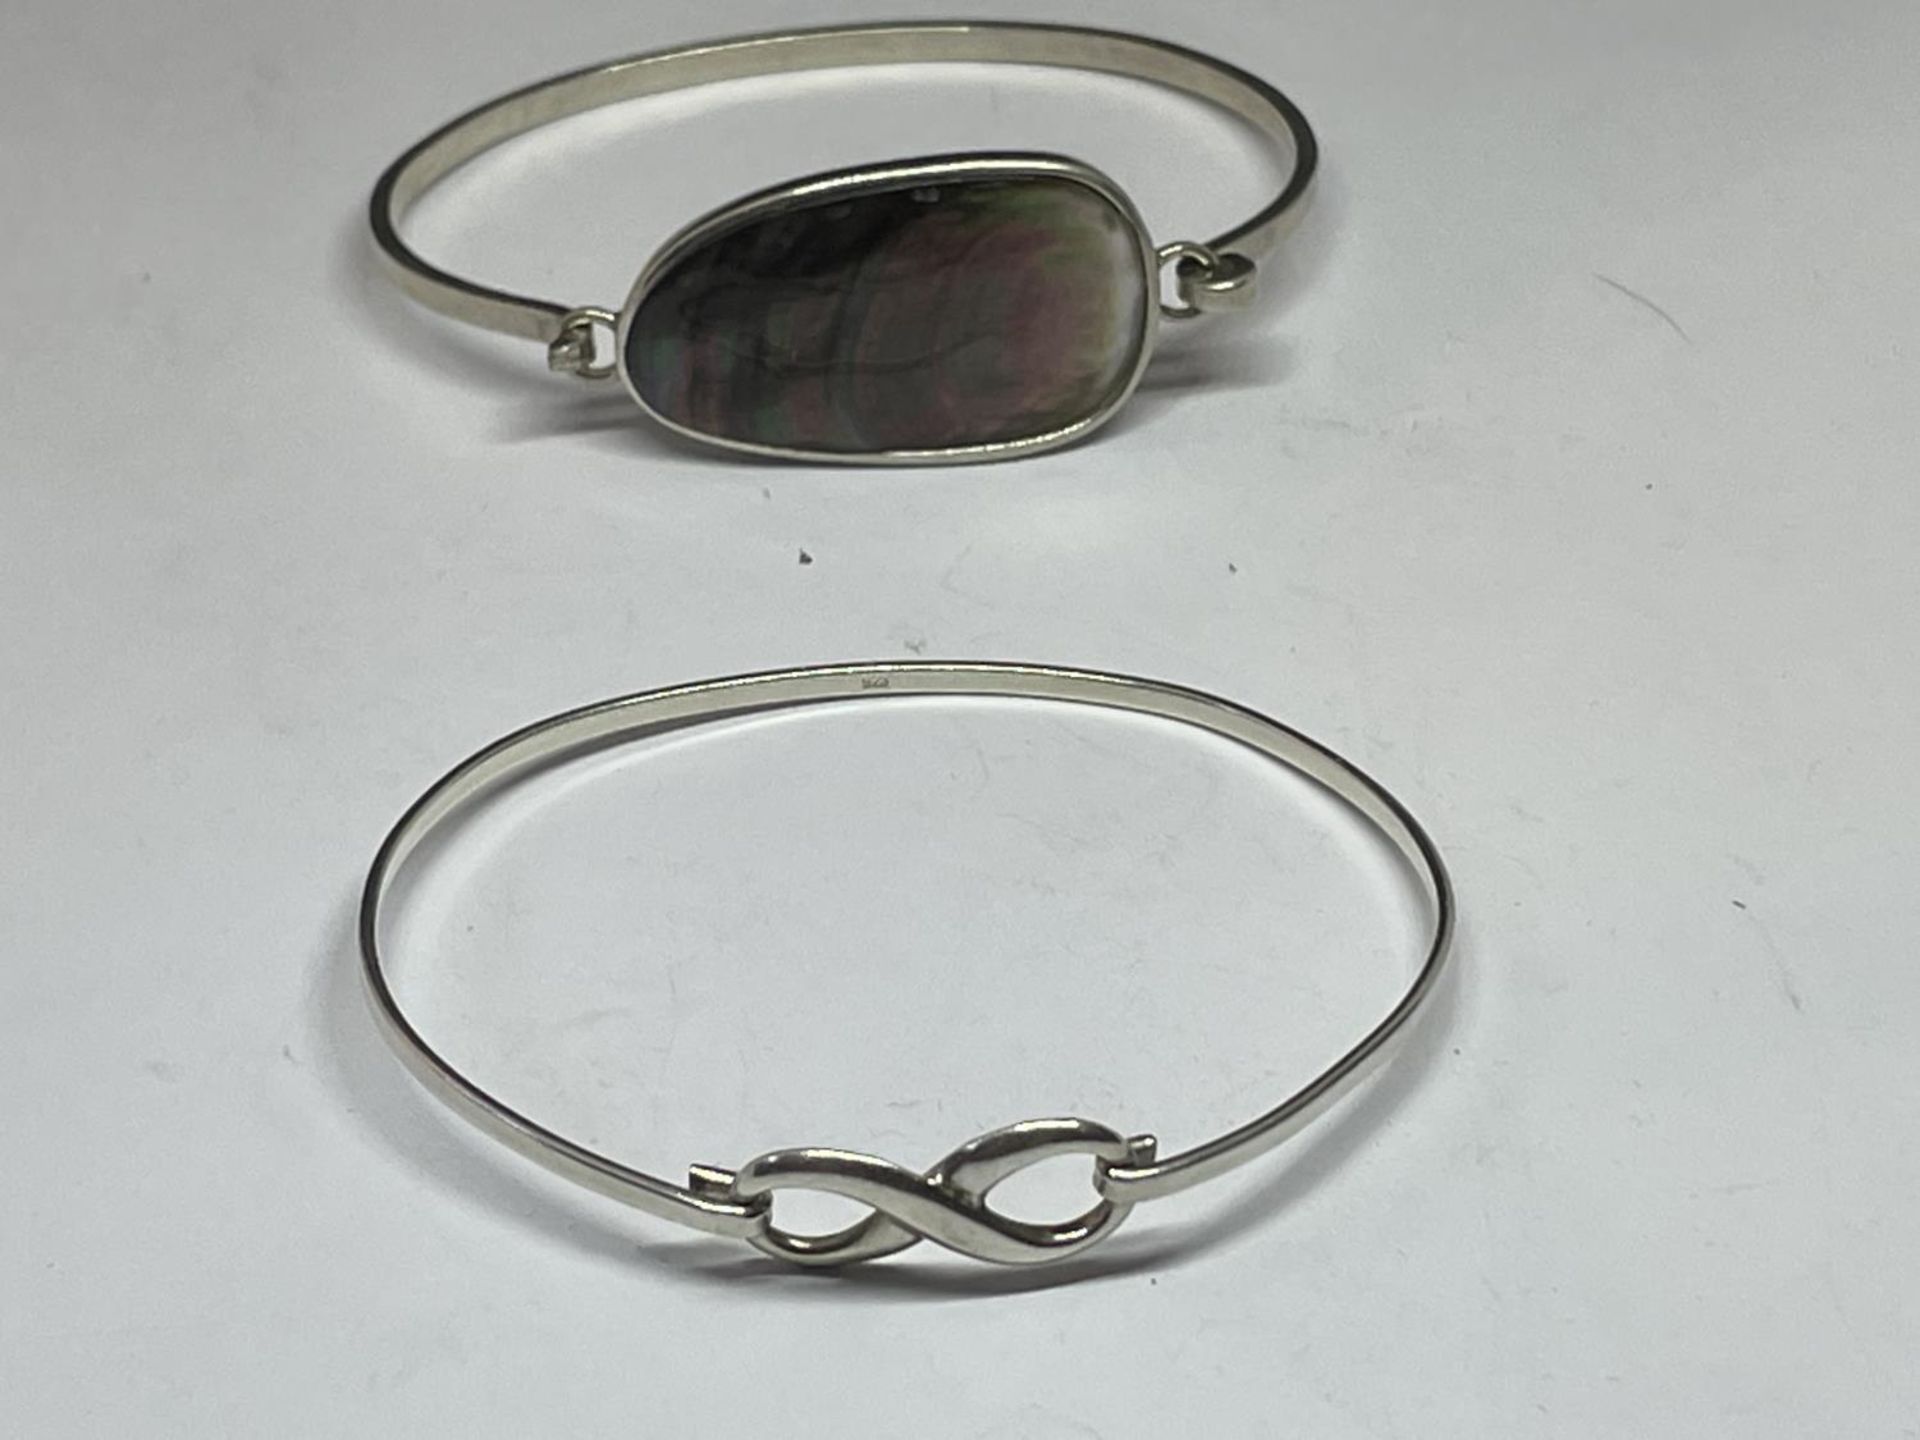 TWO SILVER BANGLES